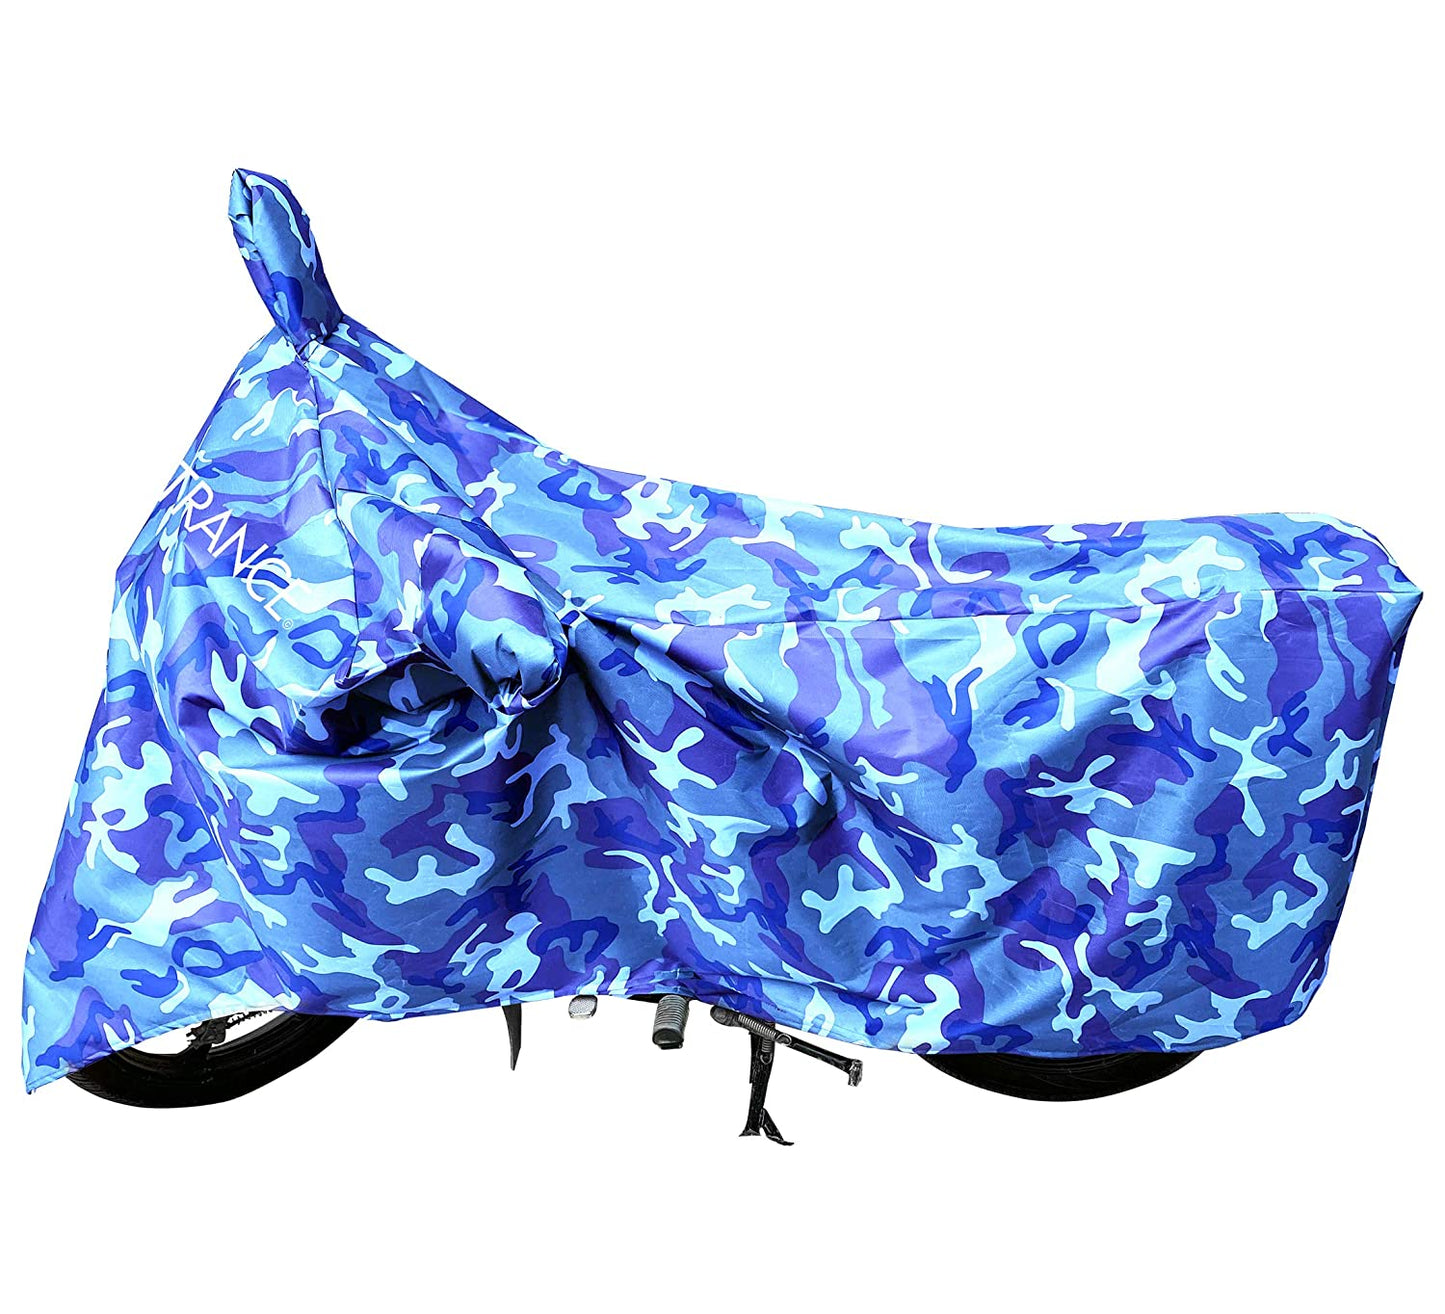 MotoTrance Jungle Bike Body Covers For Yo EXL - Interlock-Stitched Waterproof and Heat Resistant with Mirror Pockets